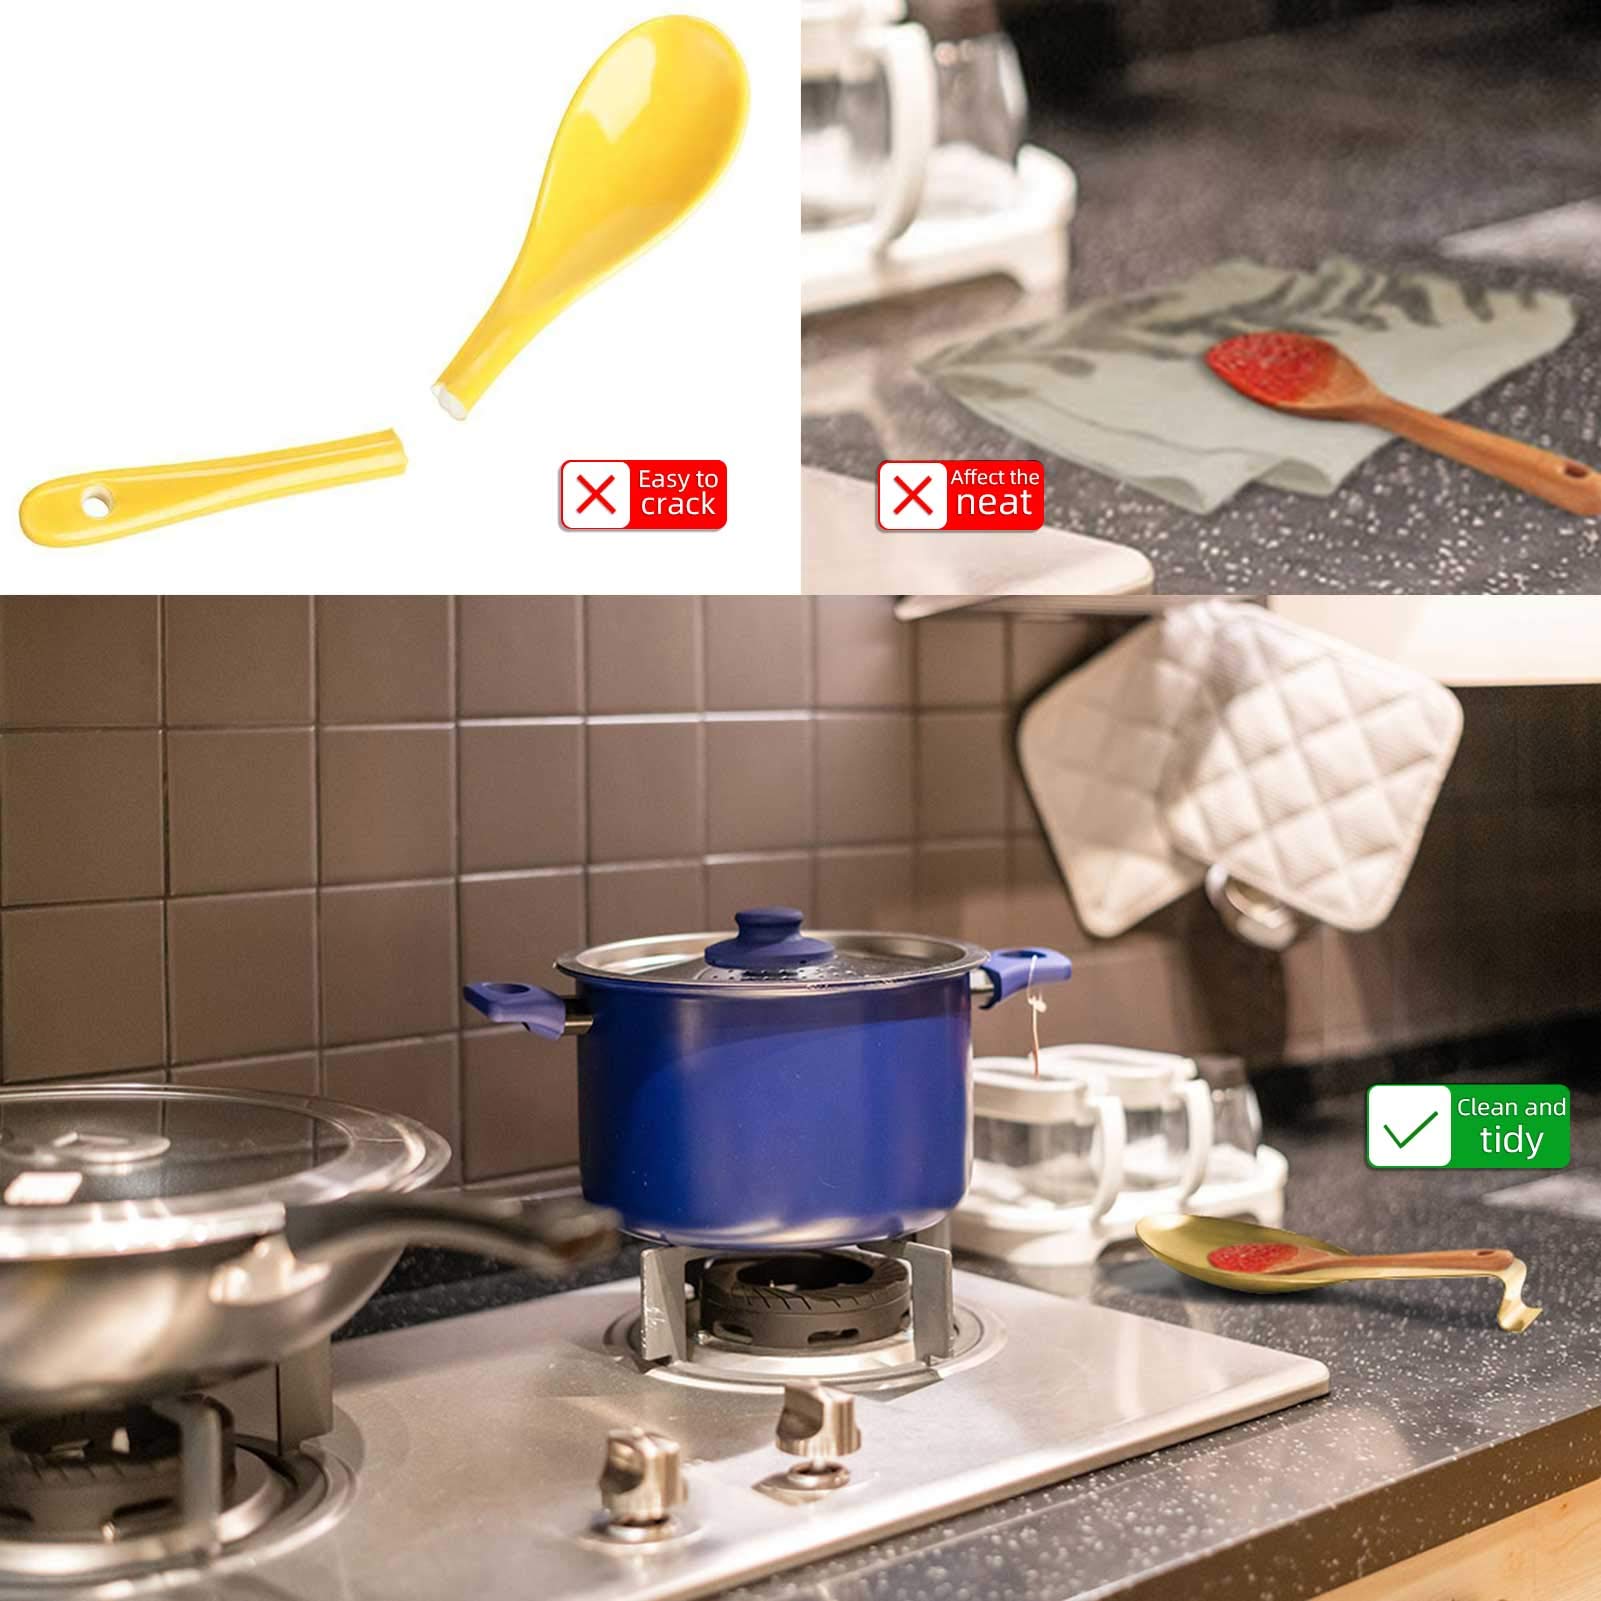 Pretty Jolly Stainless Steel Gold Spoon Rest for Kitchen Counter Cooking Utensil Rest Spoon Ladle Holder for Stove Top Rust Resistant Large Size Spatula Rest Dishwasher Safe 9.61 x 3.74 Inch(1PCS)